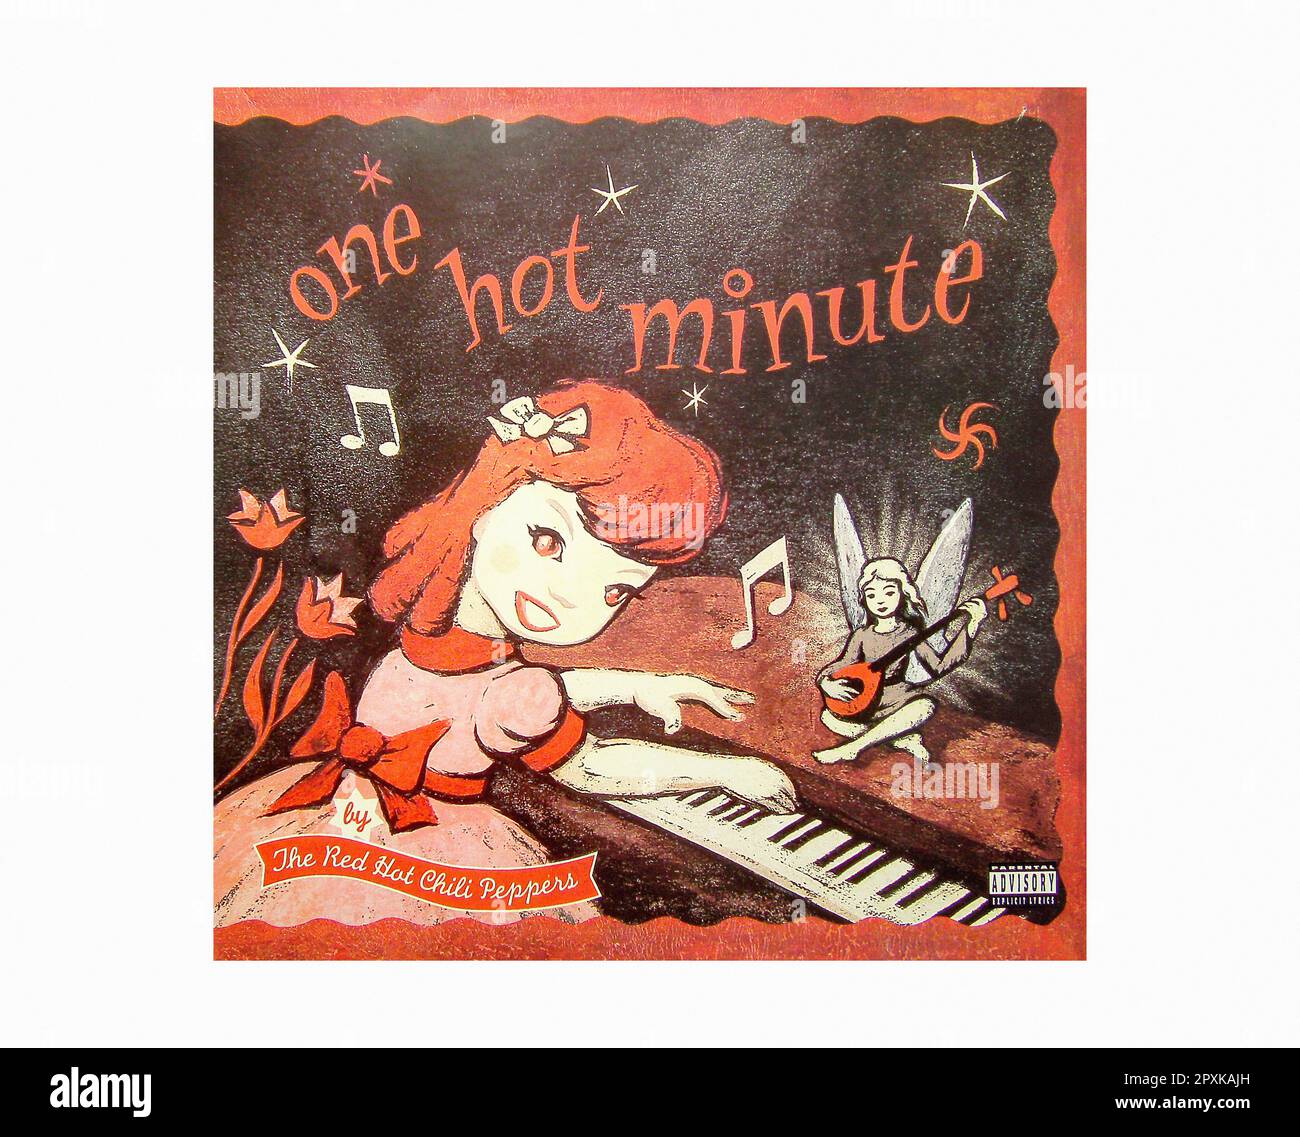 Red Hot Chili Peppers - une minute chaude [1995] - Vintage Vinyl Record Sleeve Banque D'Images